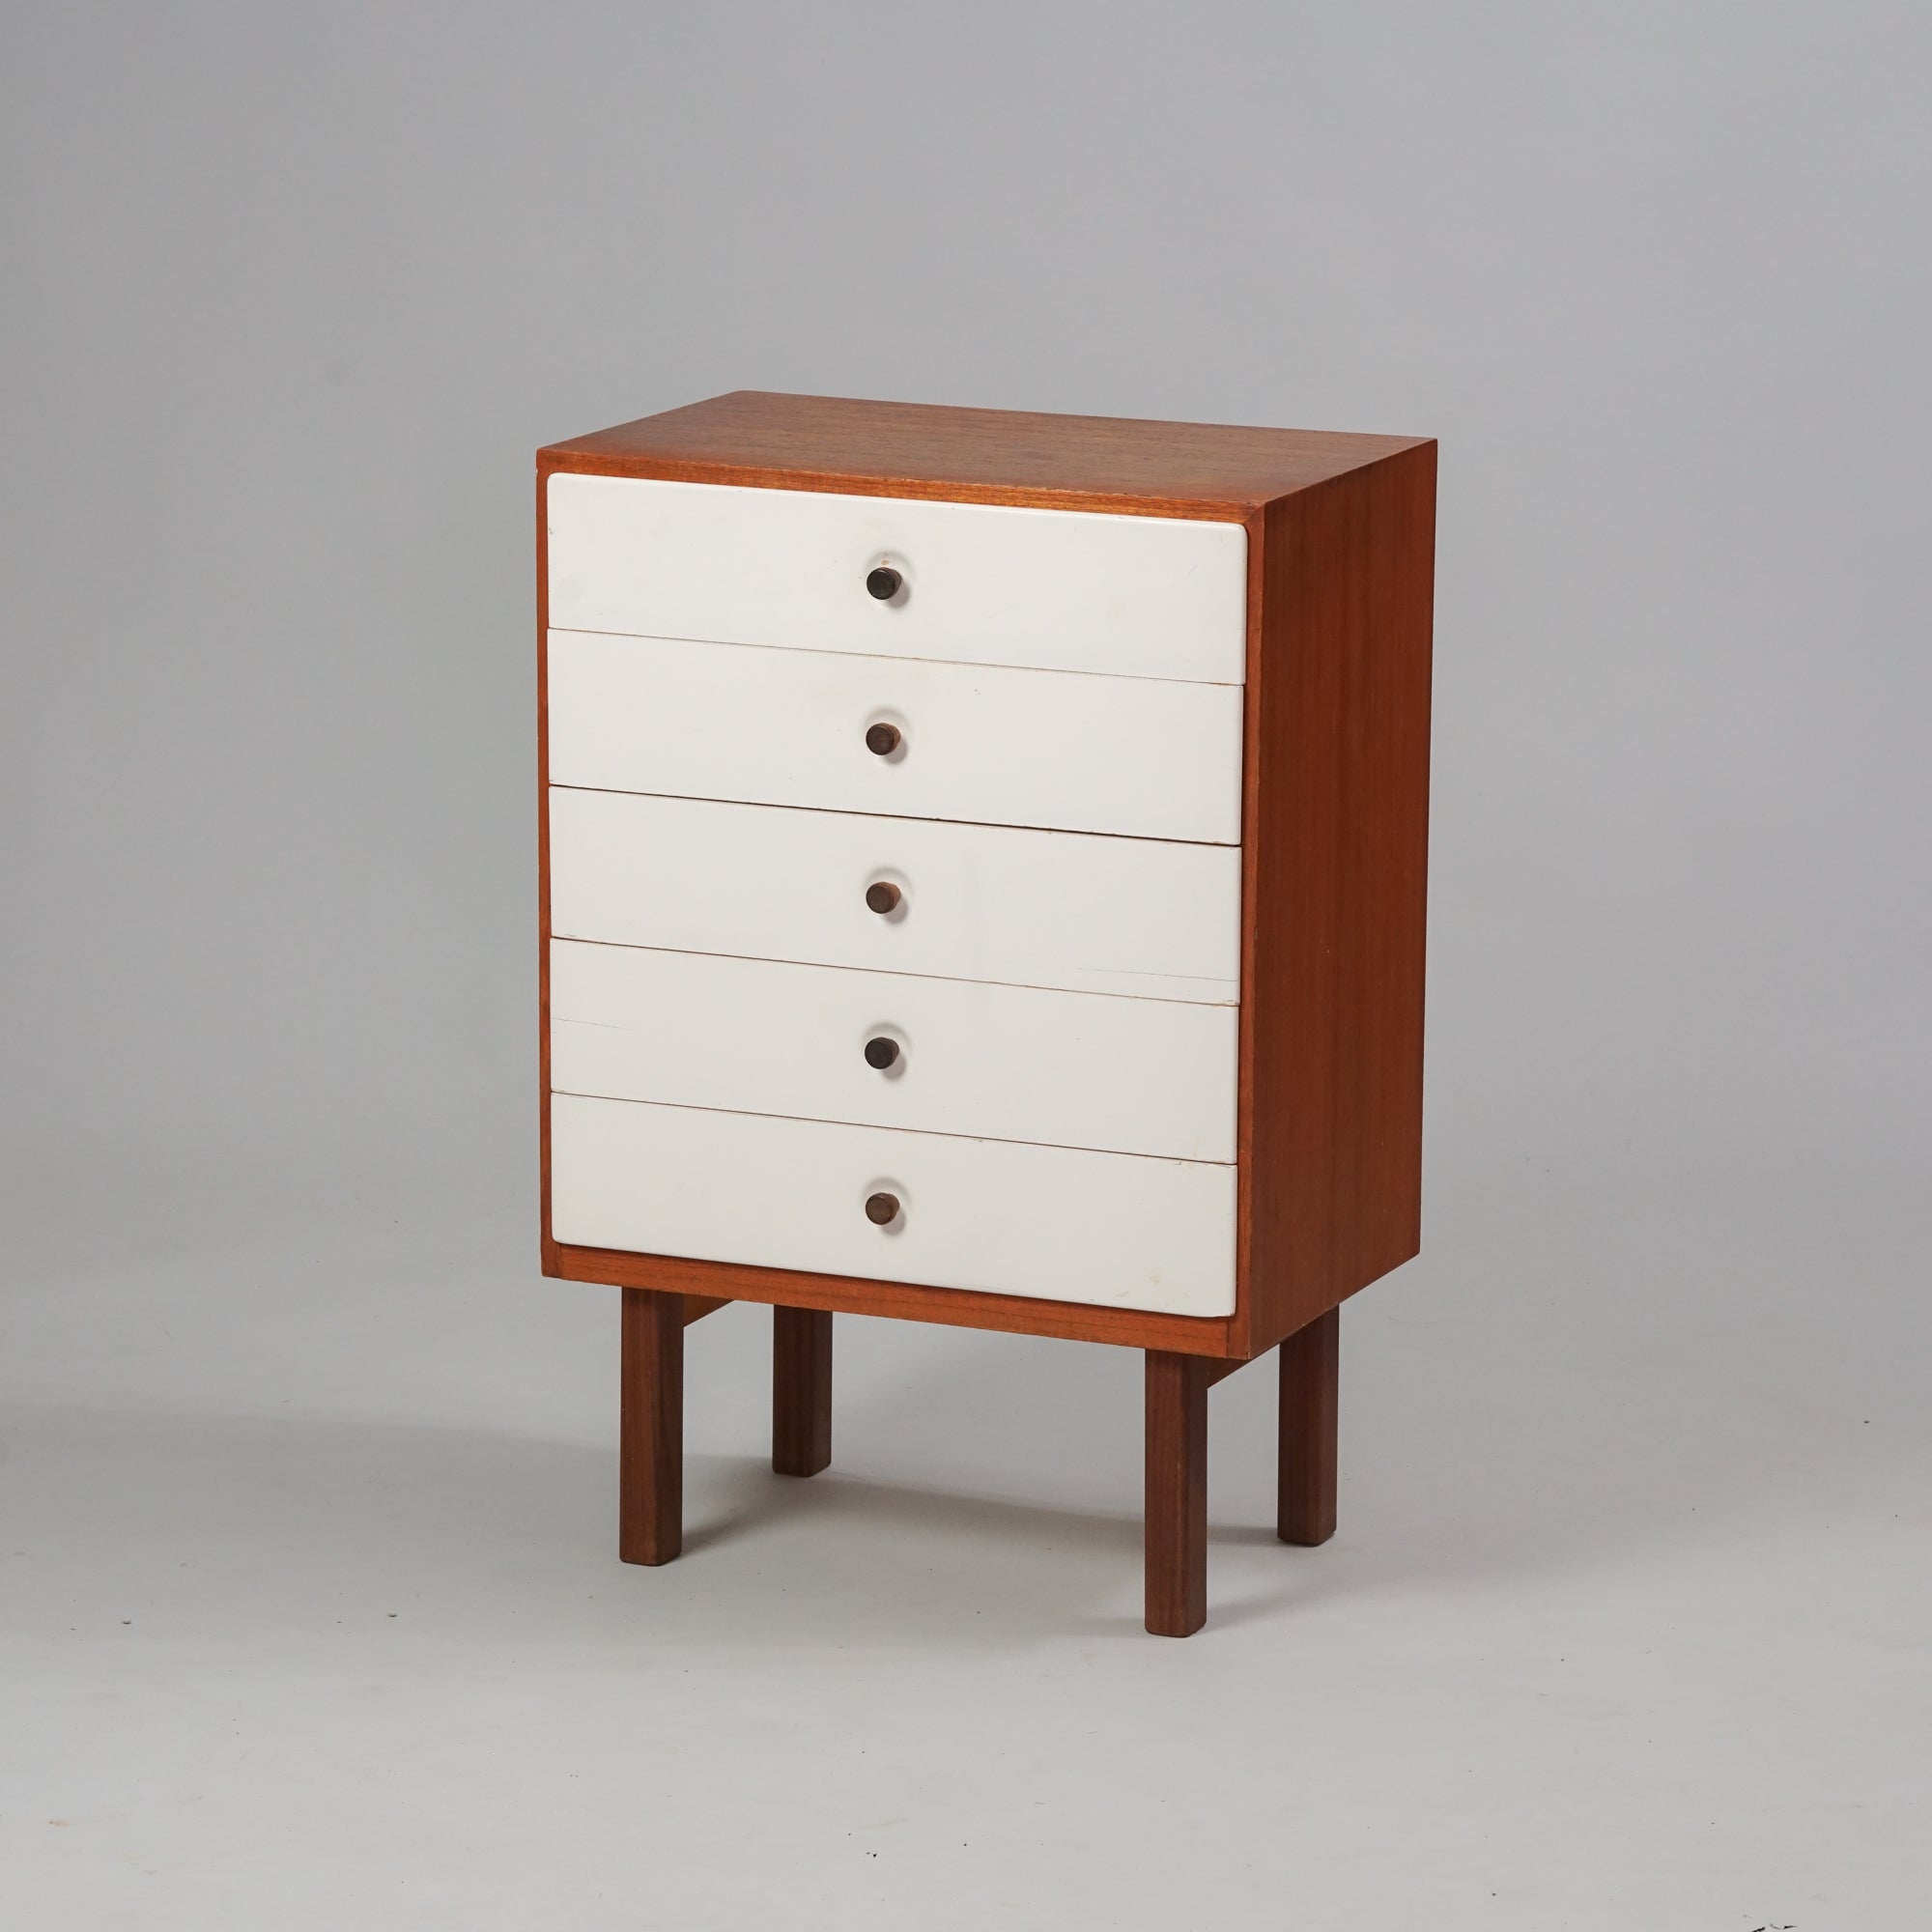 Teak cabinet with five drawers painted white.